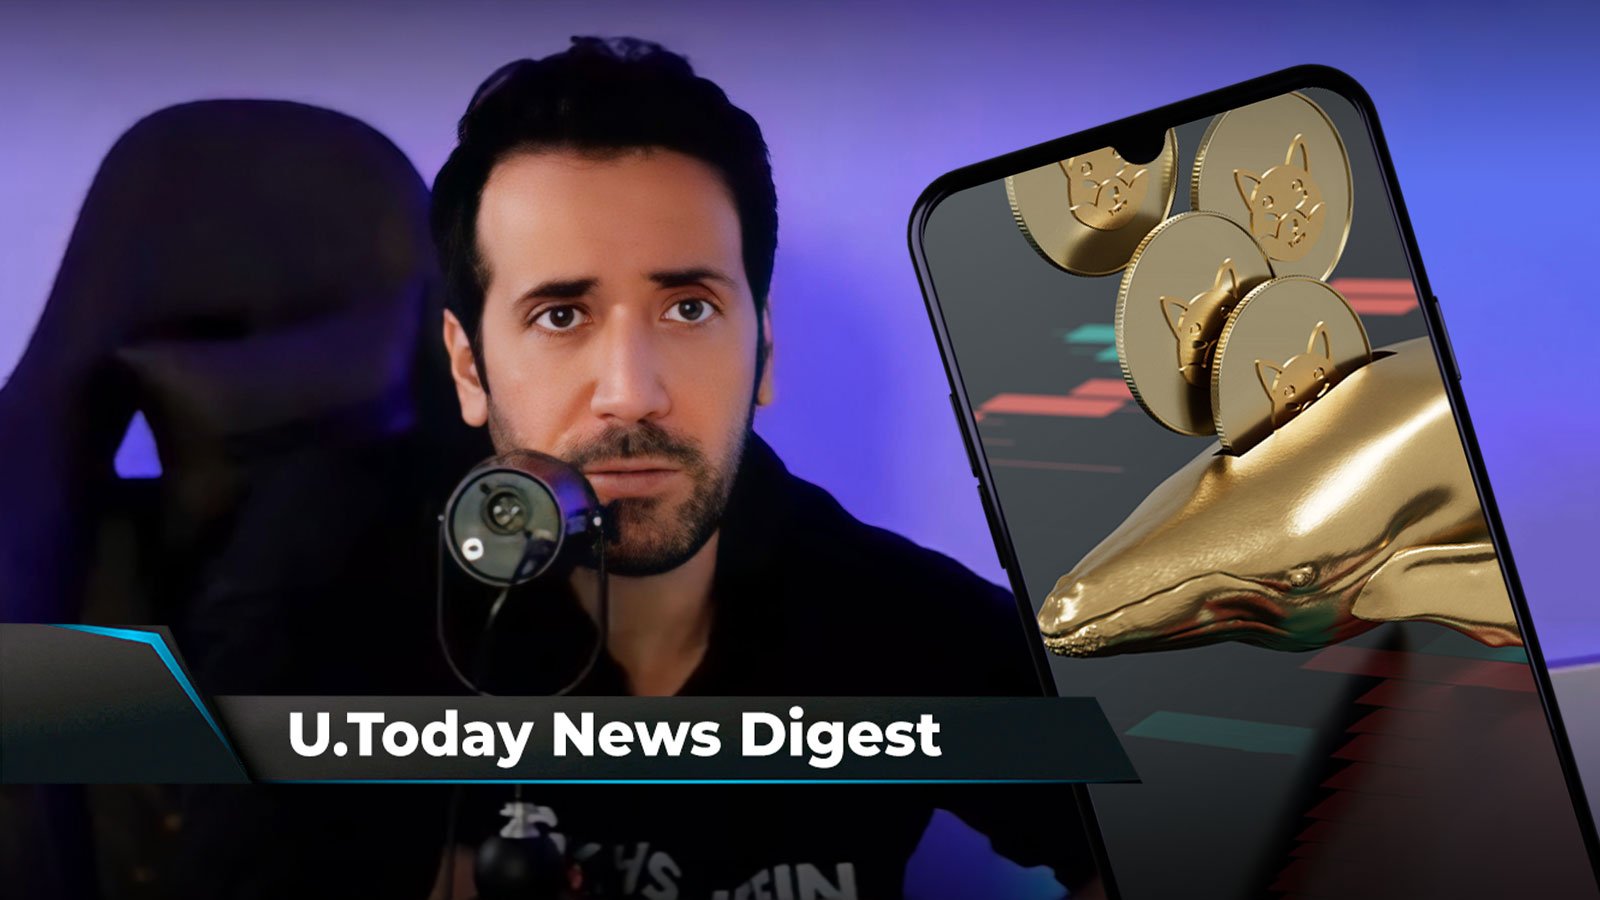 David Gokhshtein to “Go Out and Buy SHIB,” Cardano Founder Speaks on Musk, DOGE and Twitter, Whales Move 4.2 Trillion SHIB: Crypto News Digest by U.Today